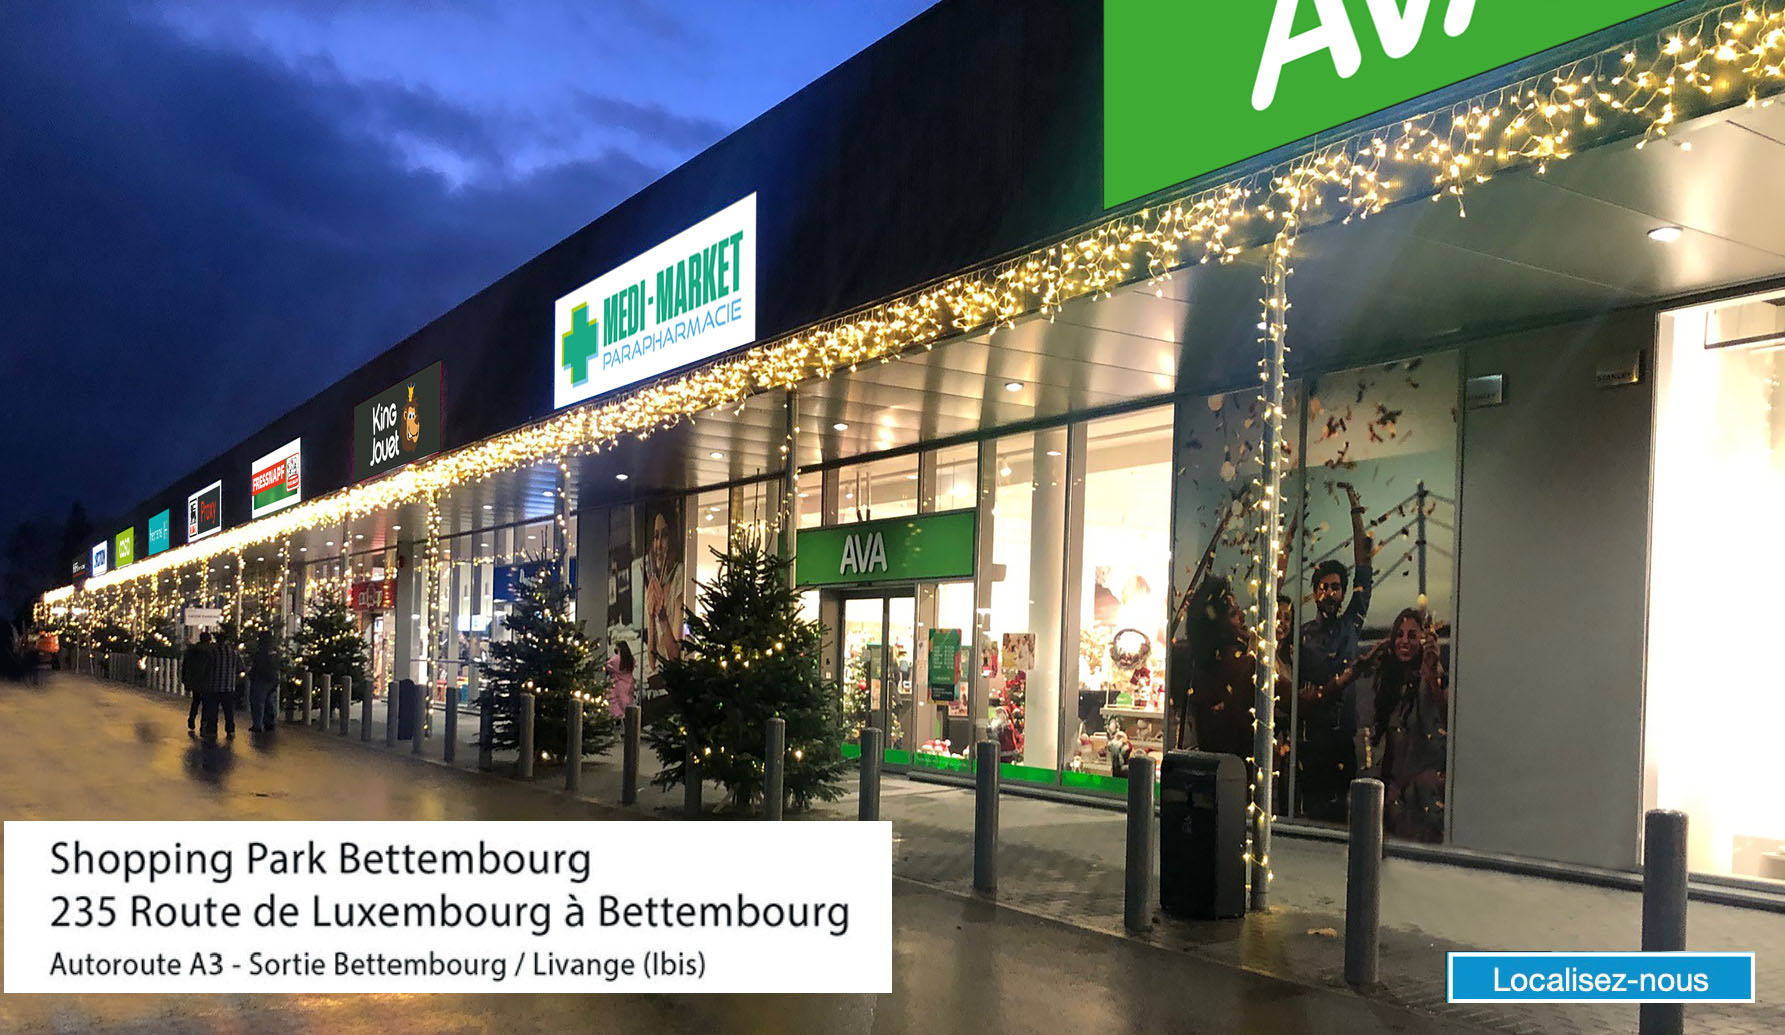 Shopping Park Bettembourg Image